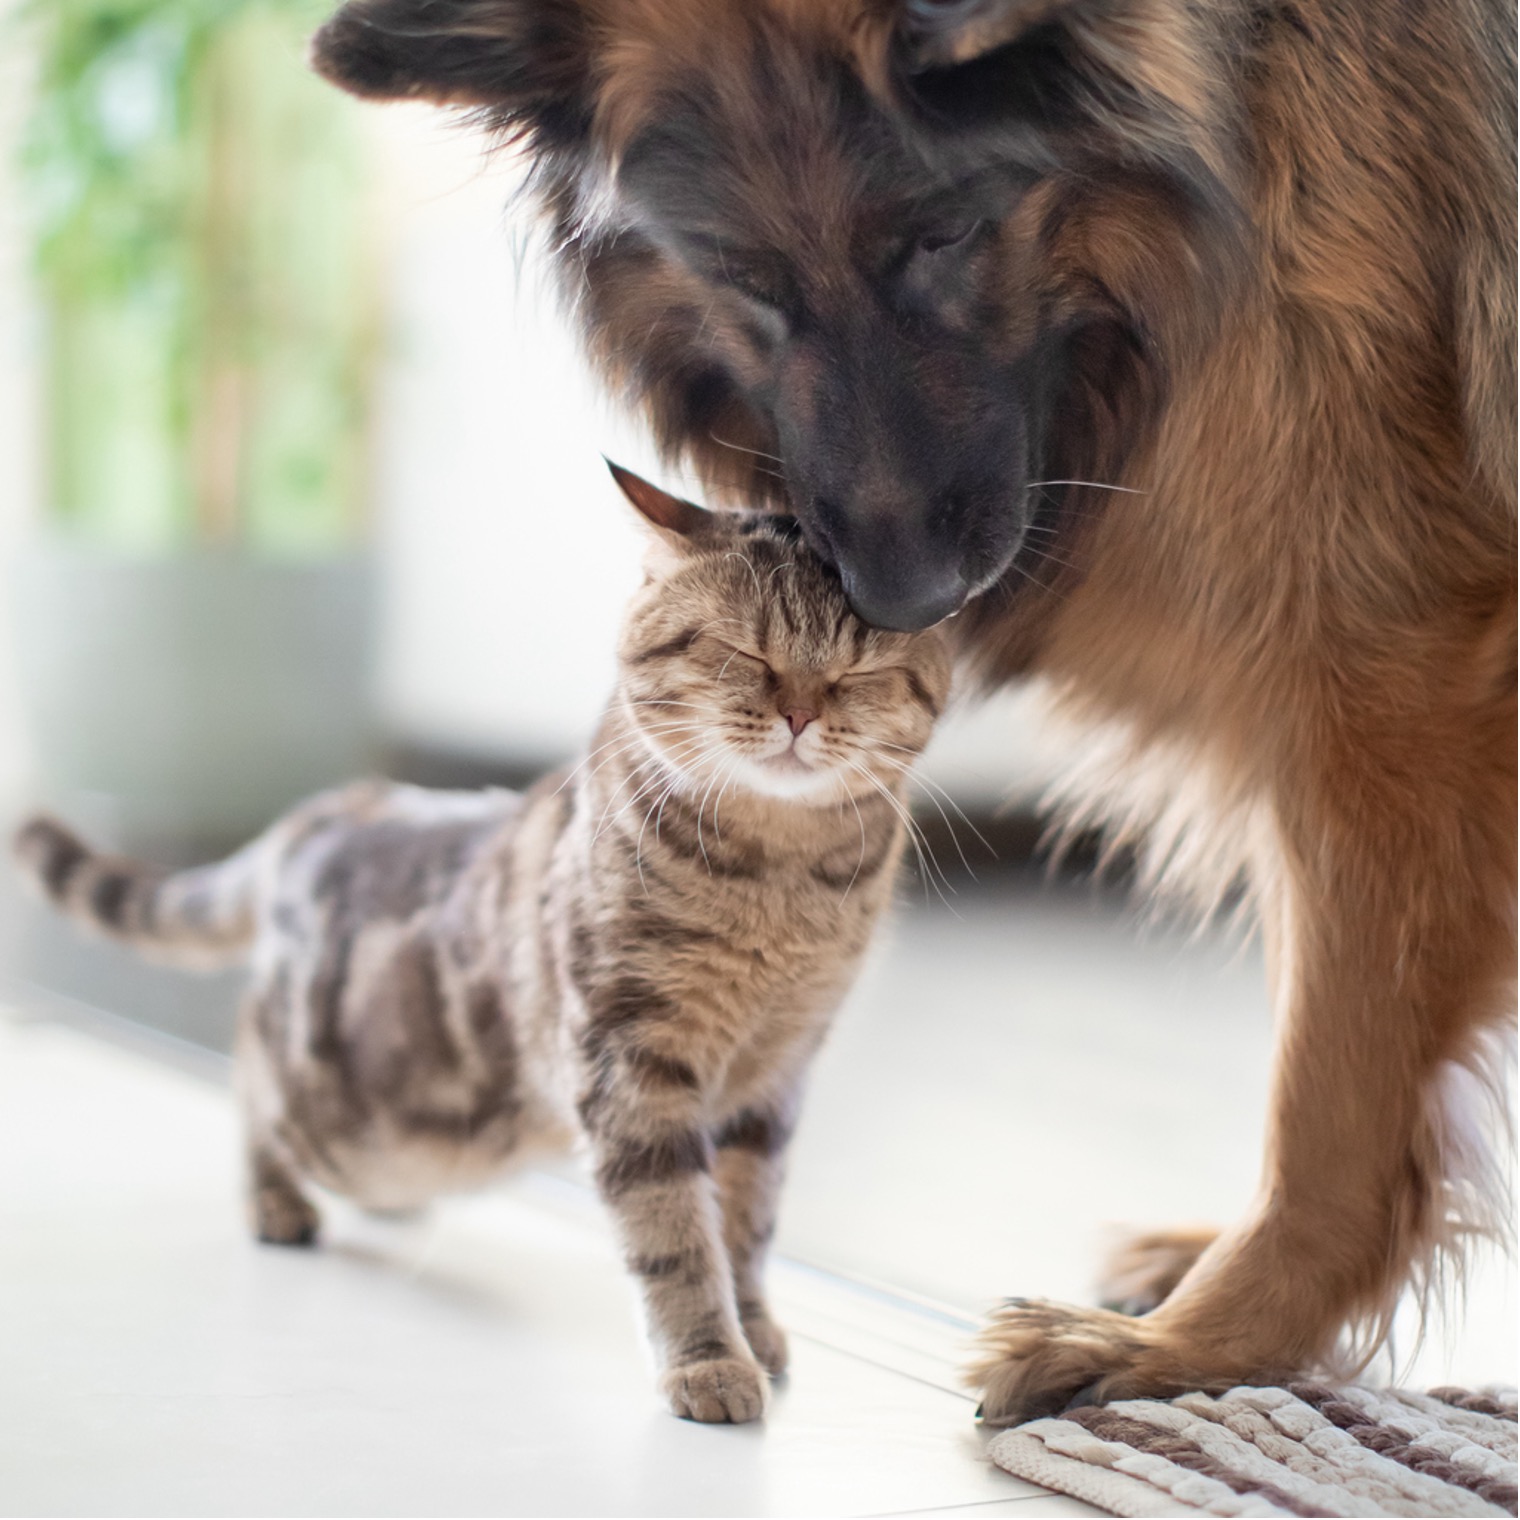 A cat rubbing up against a dog, Nurturing Your Four-Legged Family: Embracing National Pet Wellness Month